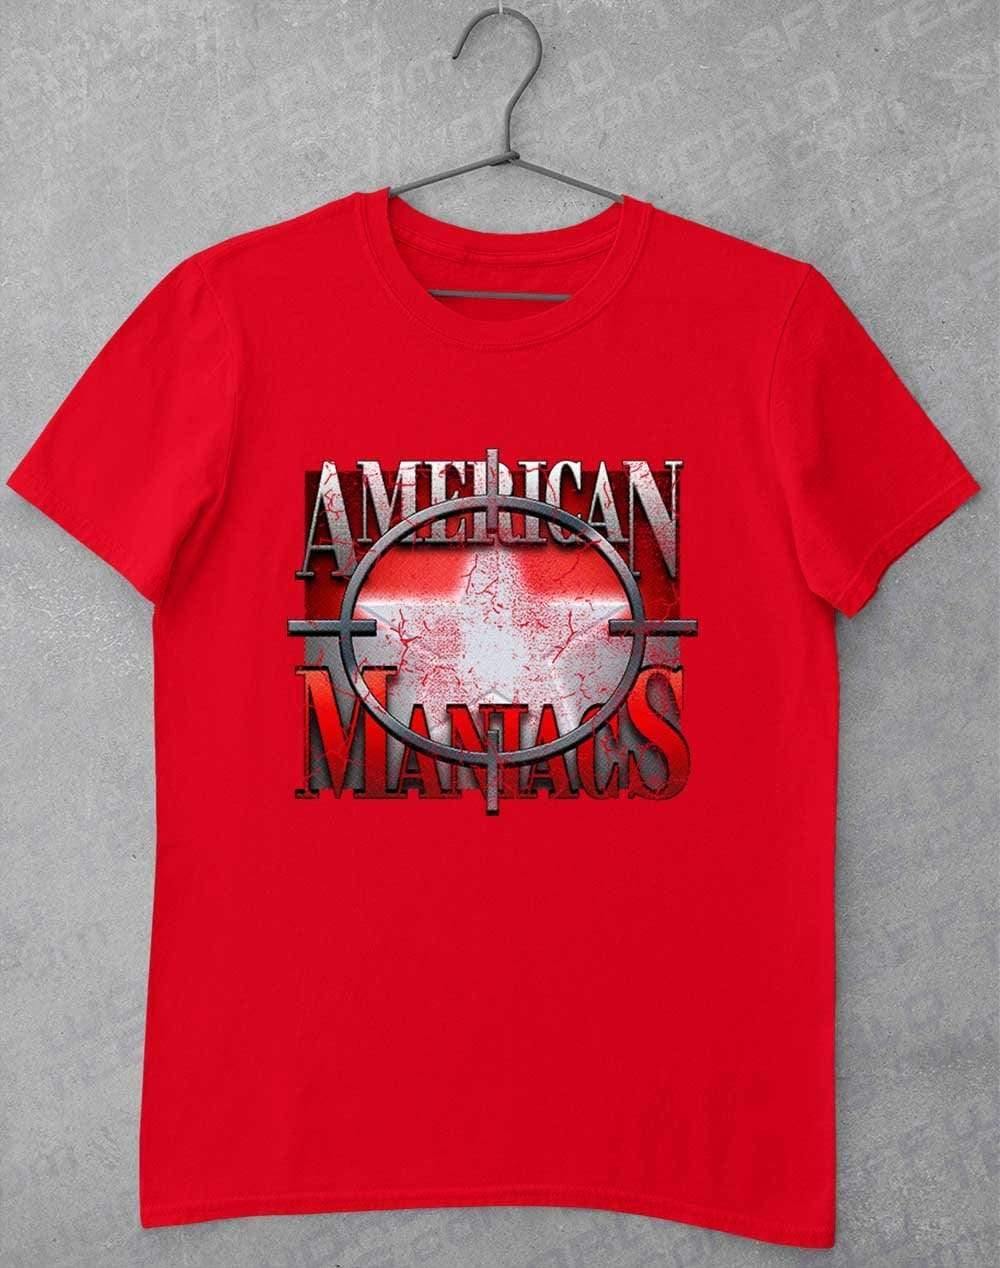 American Maniacs - T-Shirt S / Red  - Off World Tees